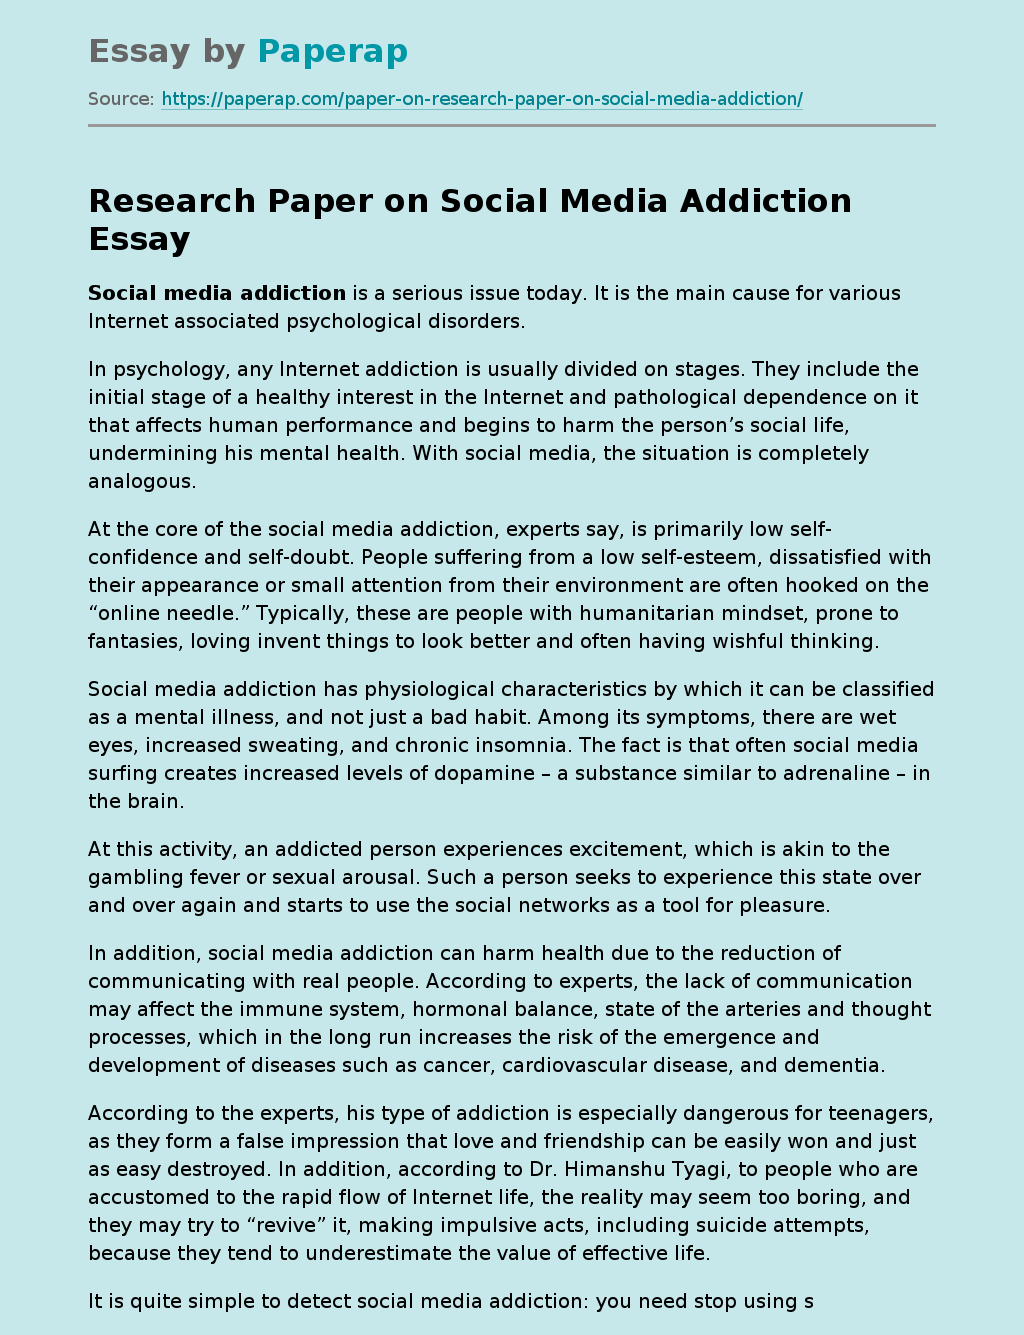 Research Paper on Social Media Addiction